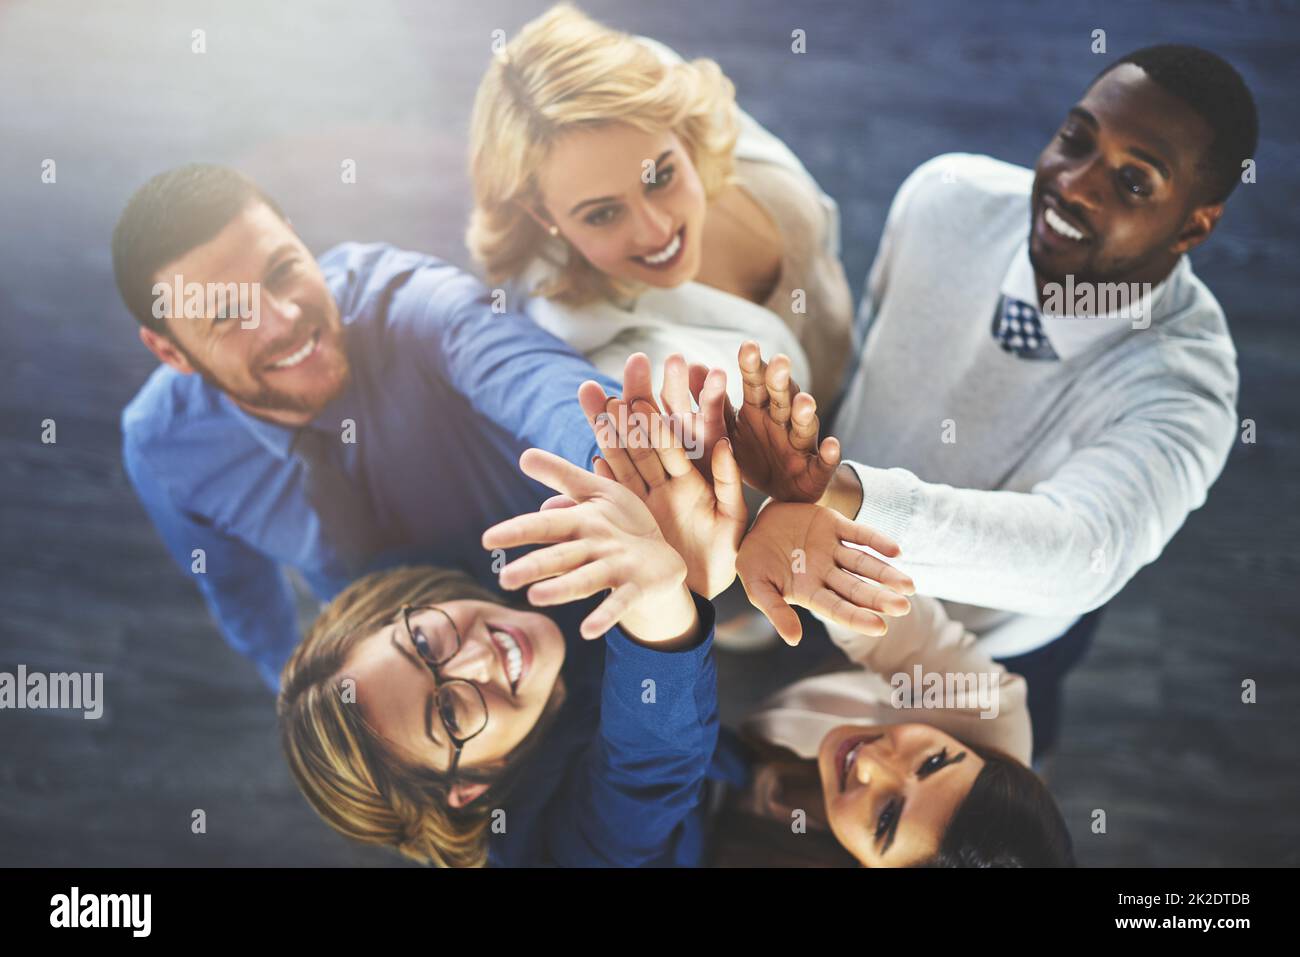 This team is going to the top. High angle shot of a group of businesspeople reaching for a high five. Stock Photo